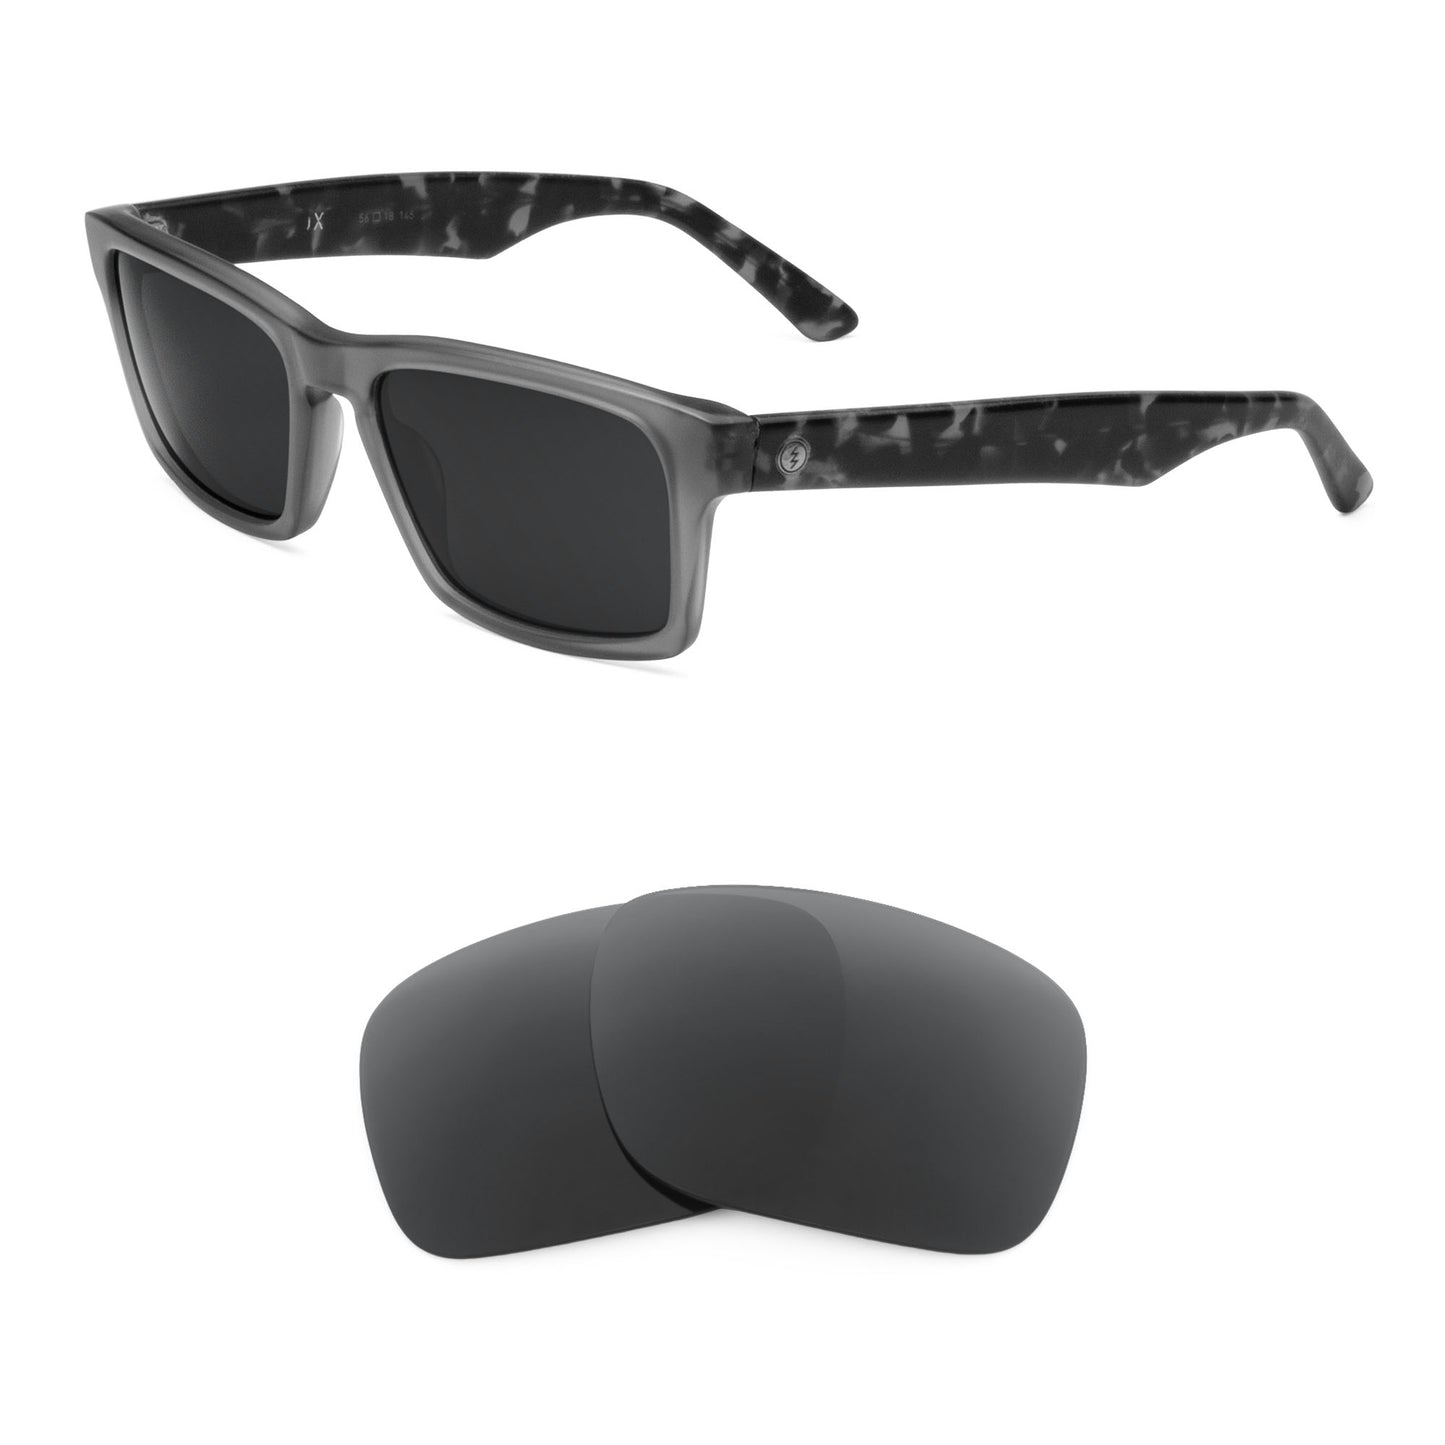 Electric Hardknox sunglasses with replacement lenses